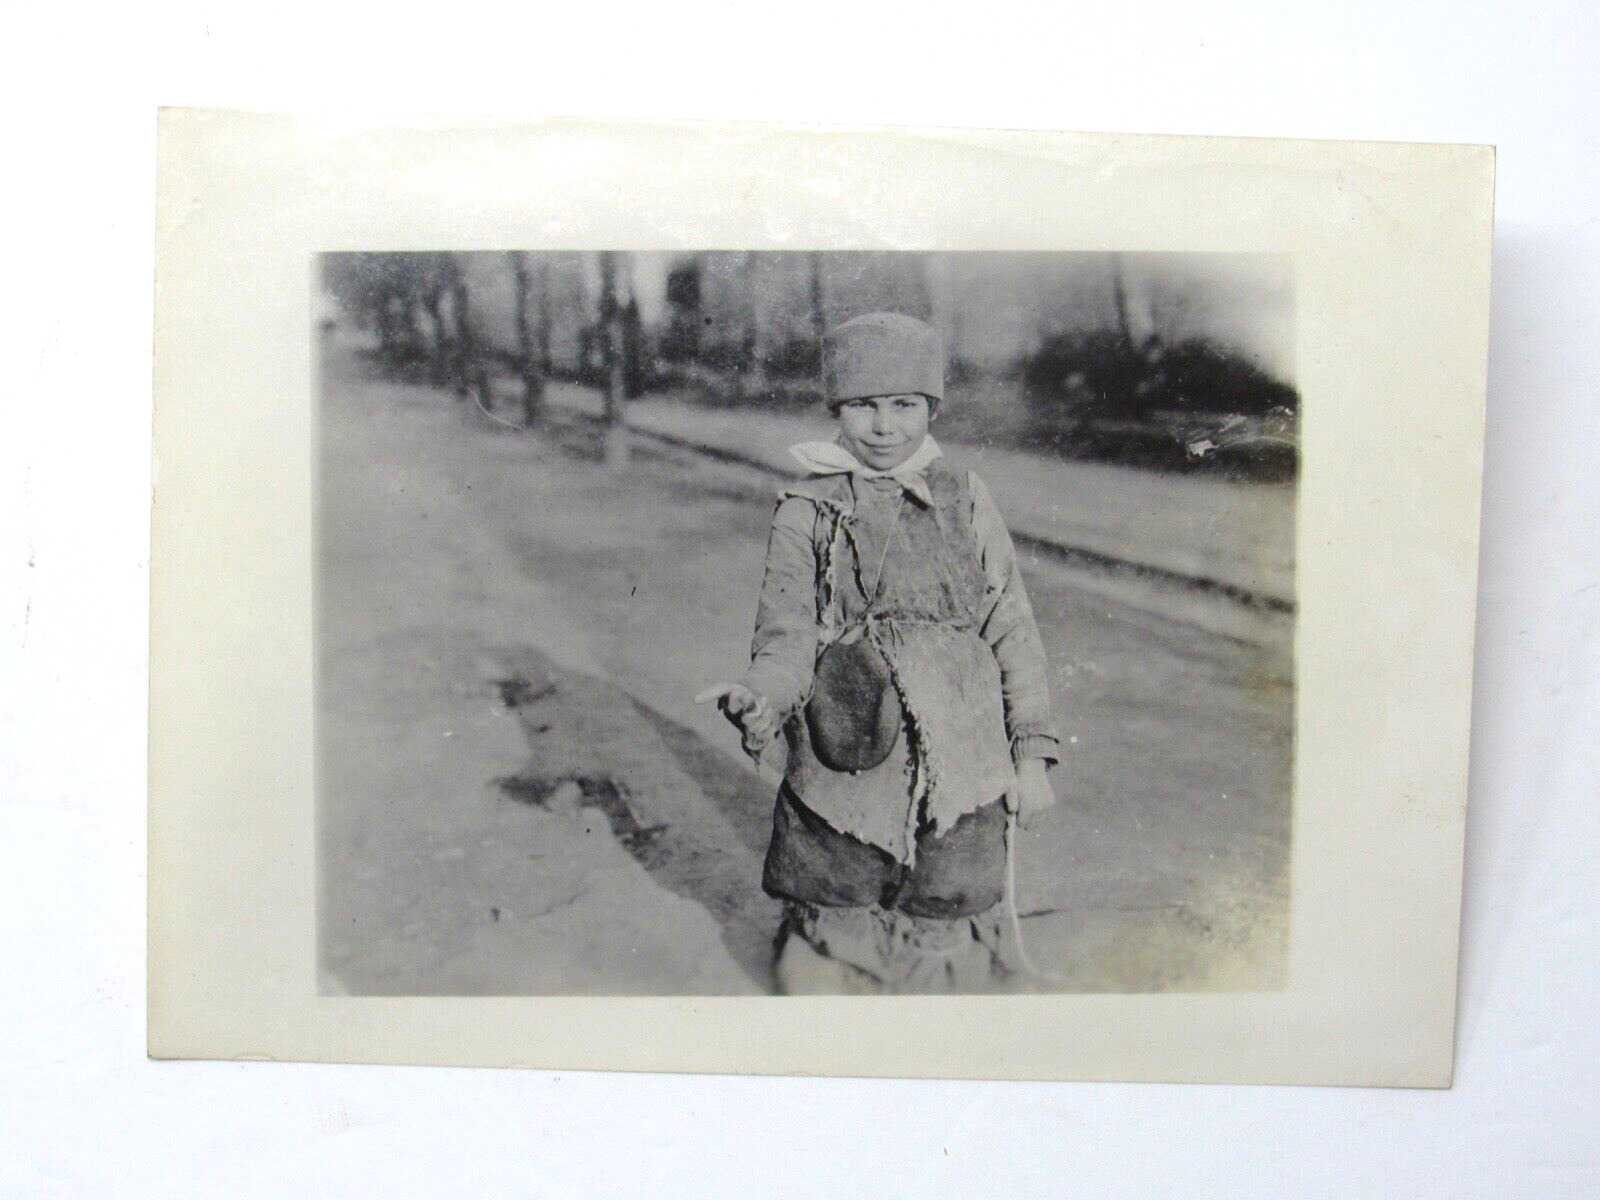 Armenian Genocide Photograph of Armenian Orphan by American Red Cross c1920 RARE